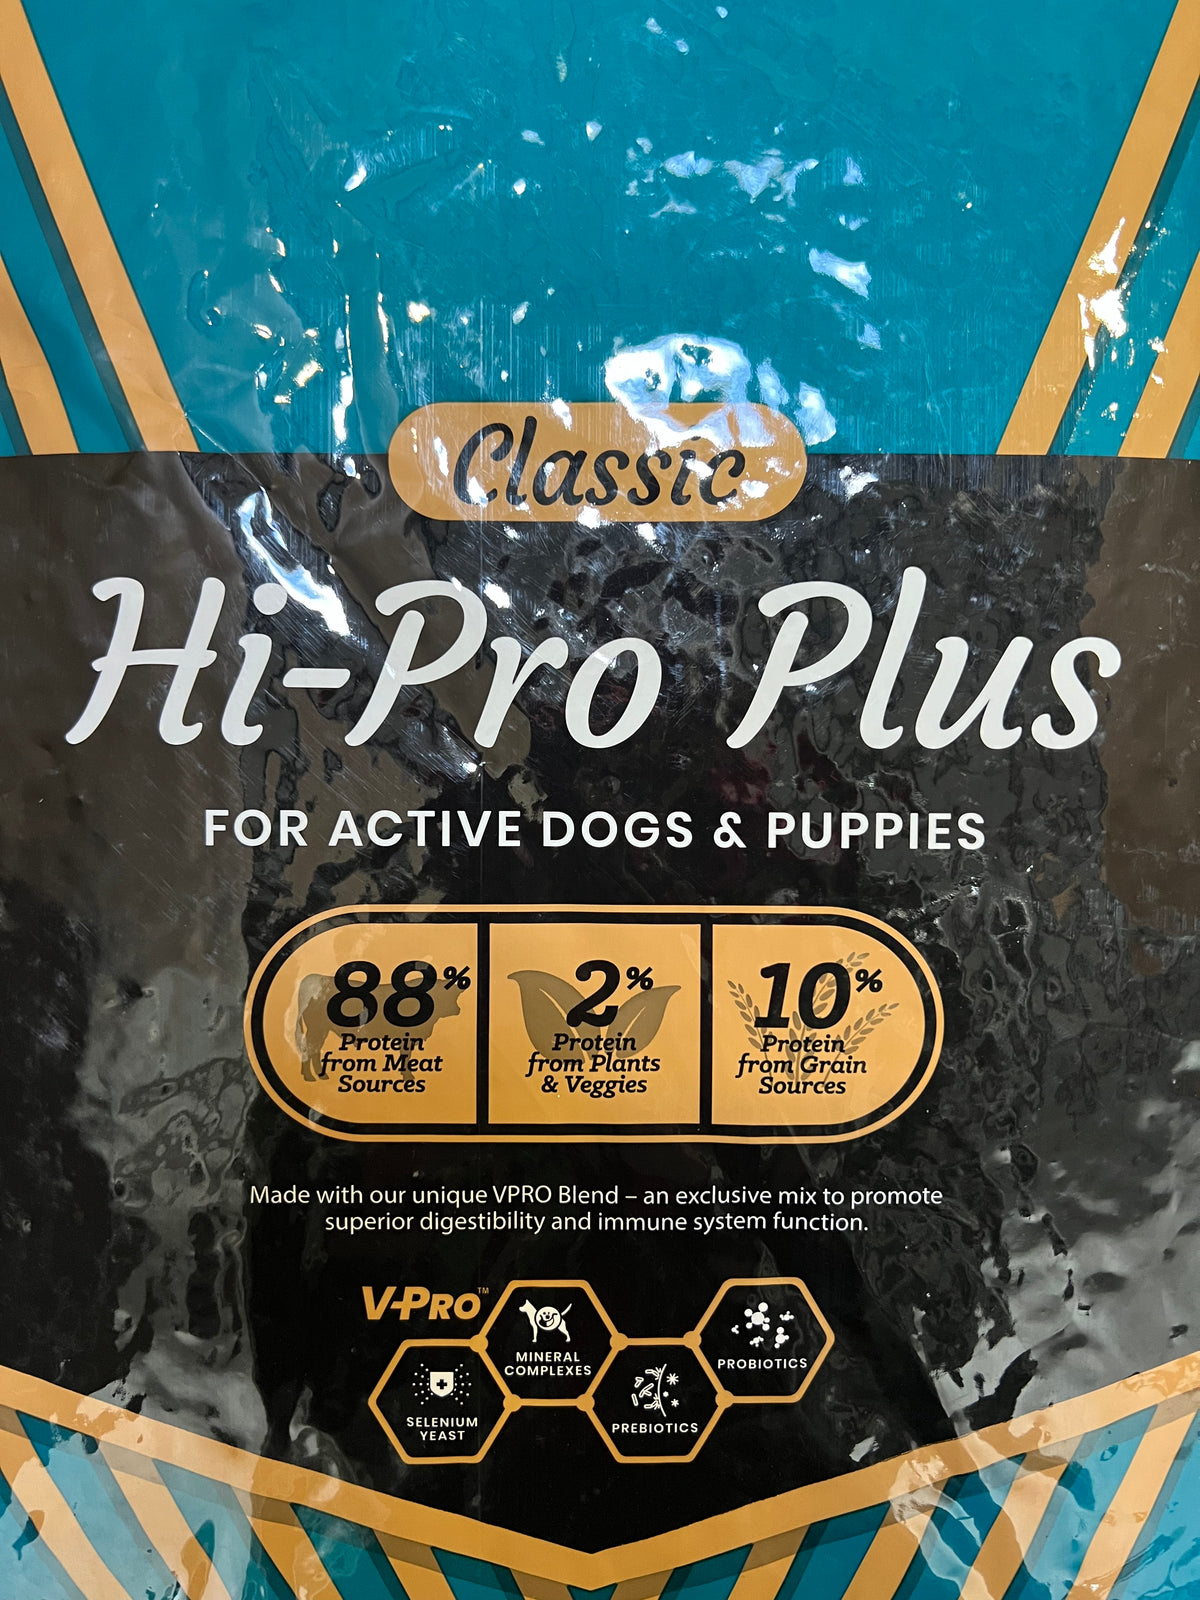 L141 2x Victor Hi-Pro Plus Dog Food For Active Dogs &amp; Puppies